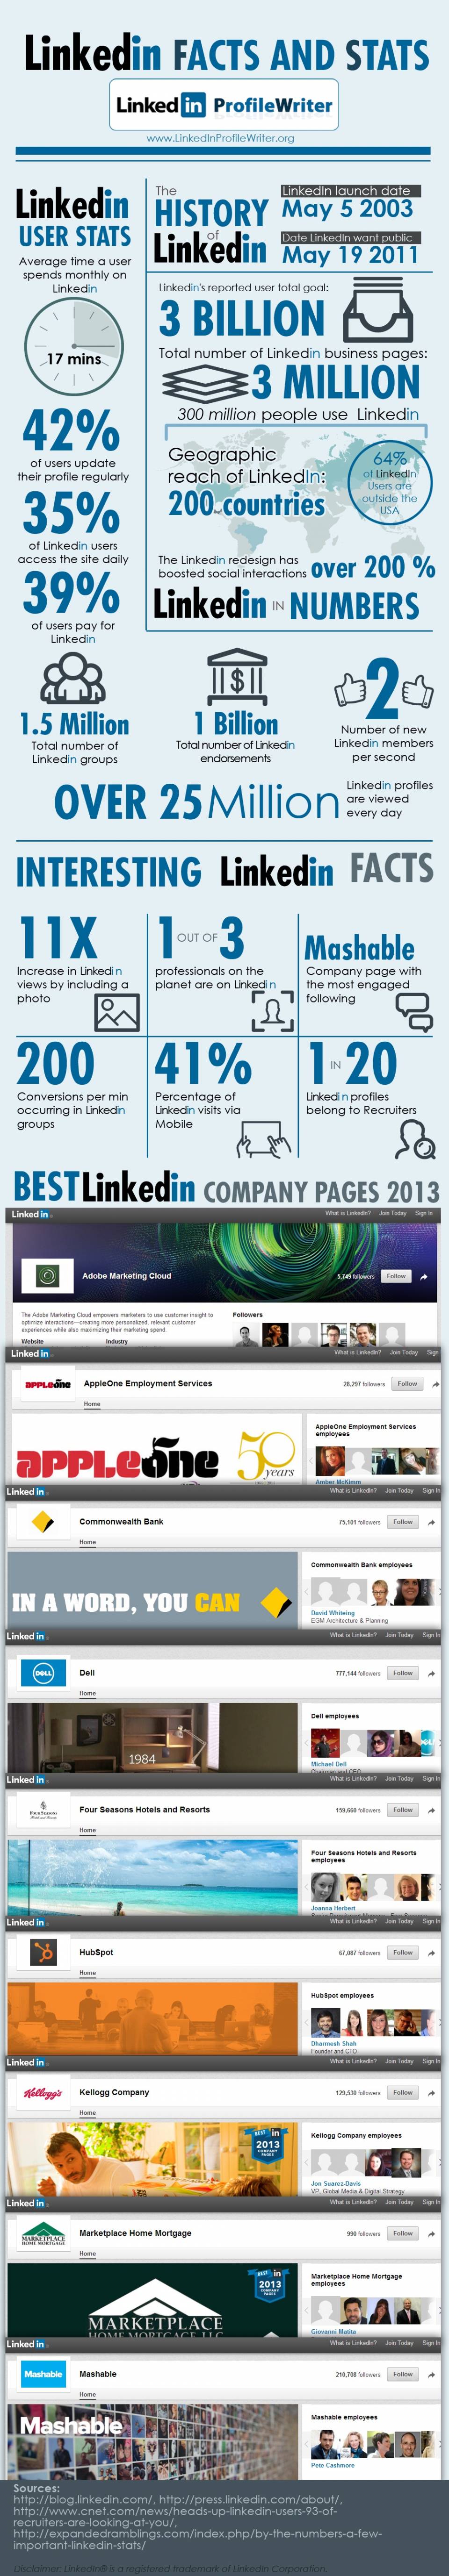 WERSM Linkedin Infographic Stats and Facts